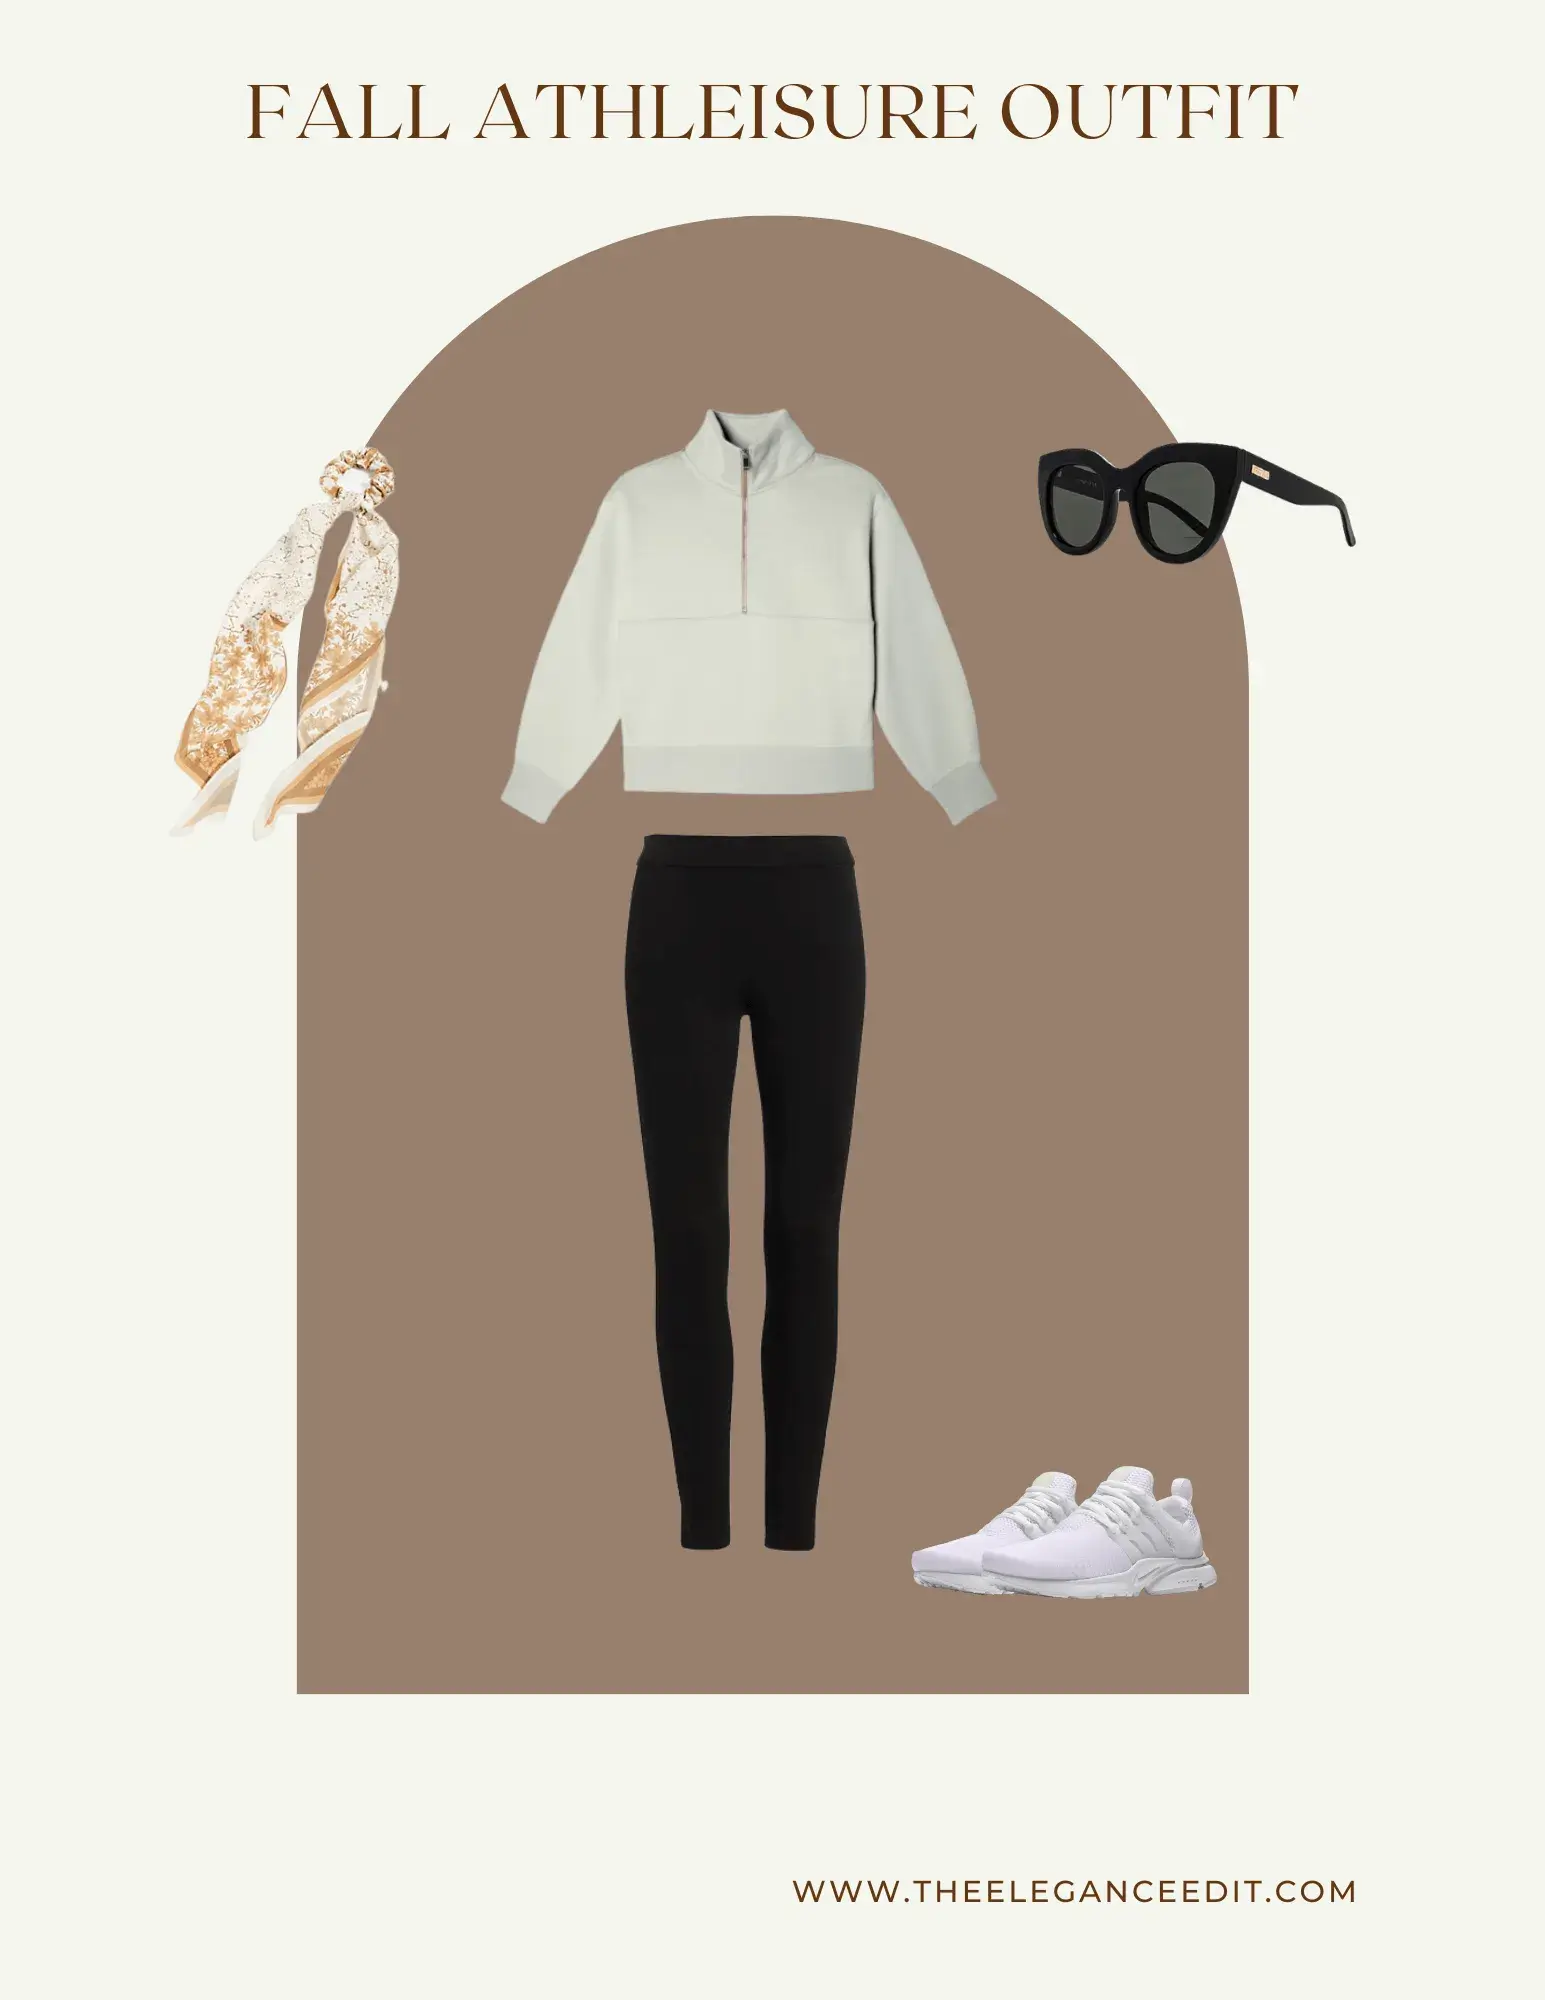 A Chic Athleisure Capsule Wardrobe You'll Wear Nonstop